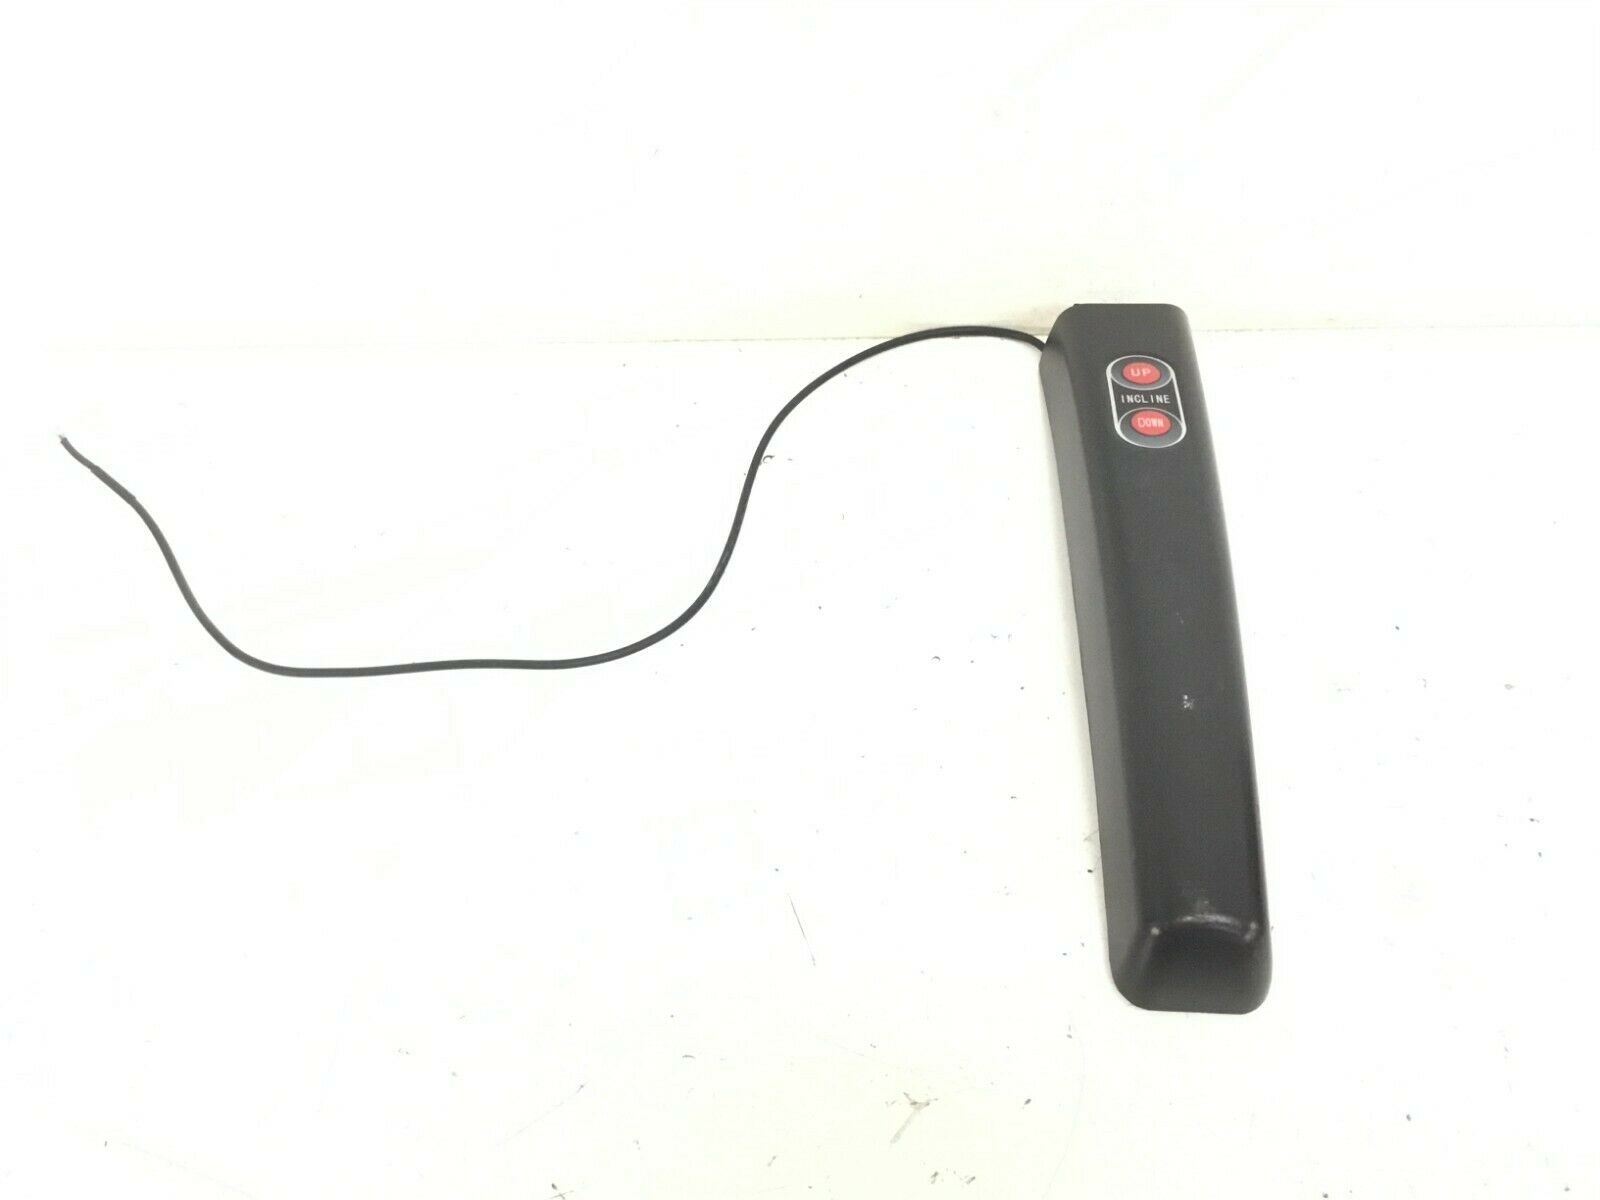 Smooth Fitness 9.65 LC or 9.65 LCi Treadmill Incline Handlebar Switch (Used)